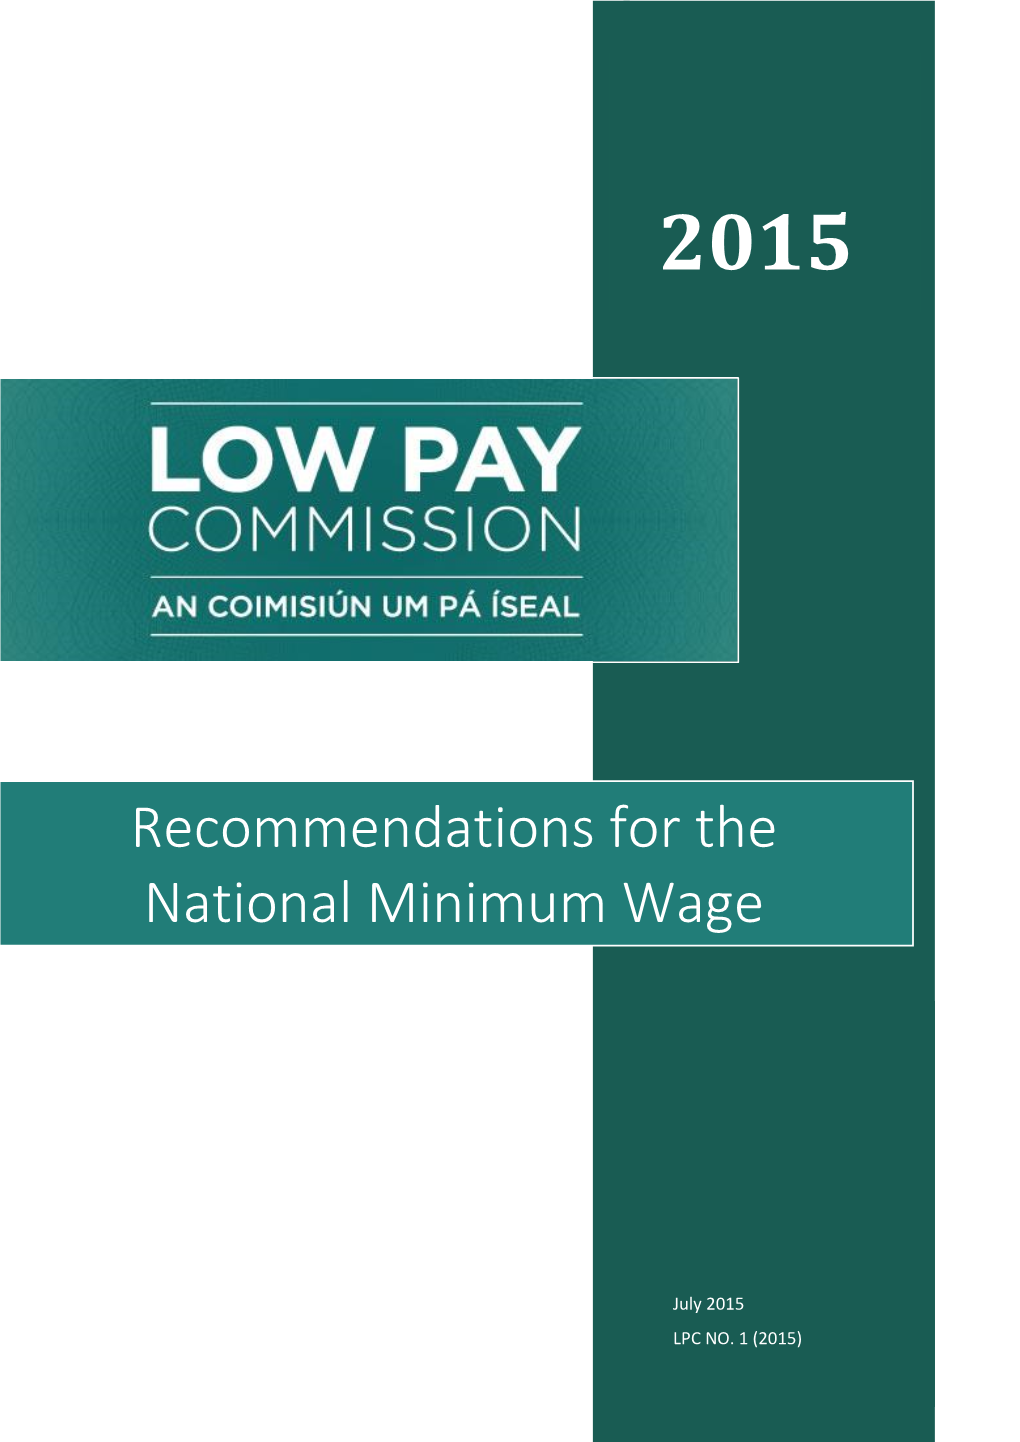 Recommendations for the National Minimum Wage